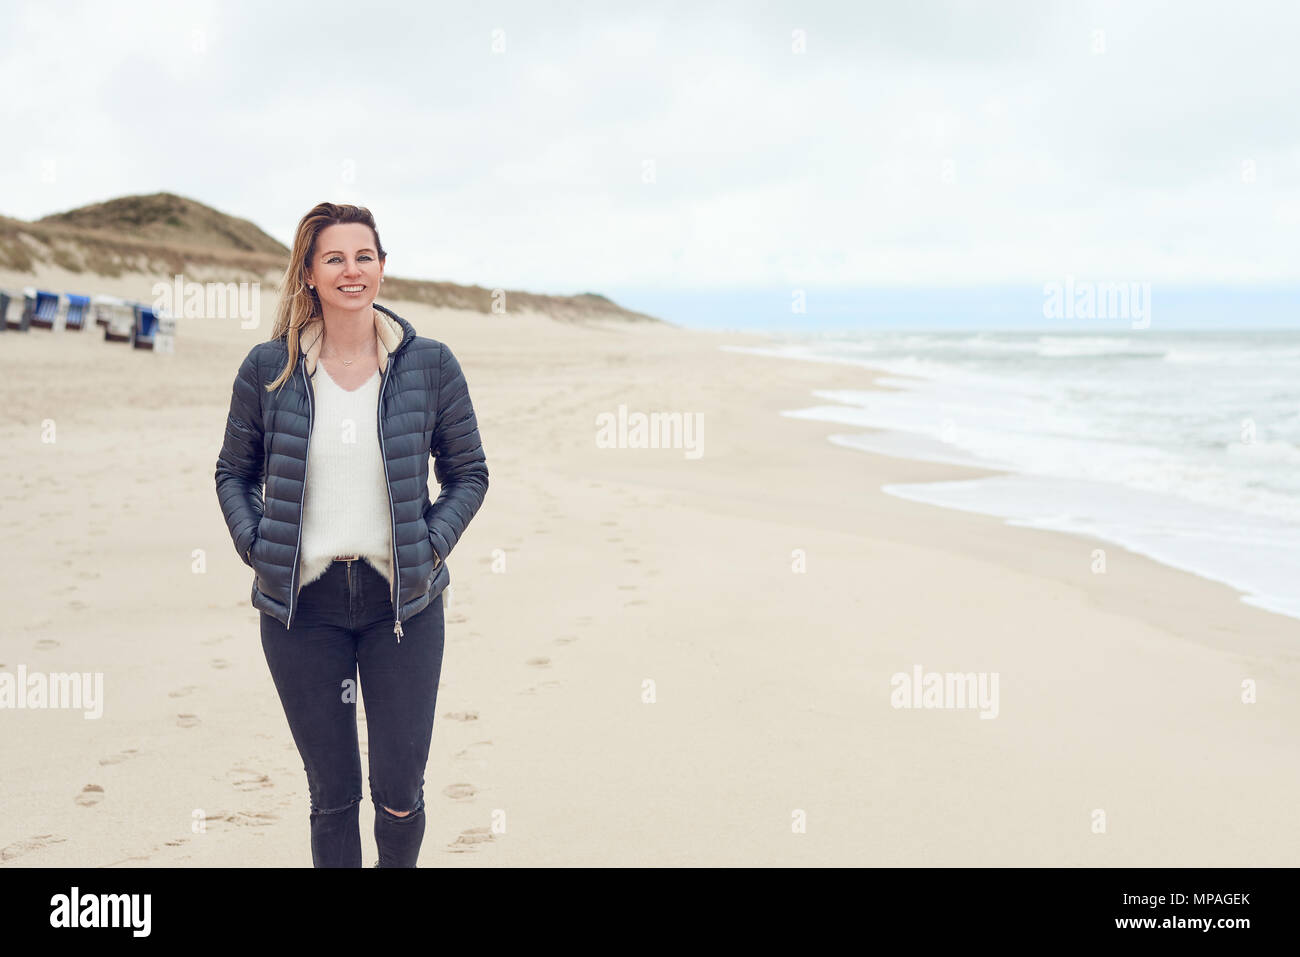 Woman walking on a beach on a cloudy day Stock Photo